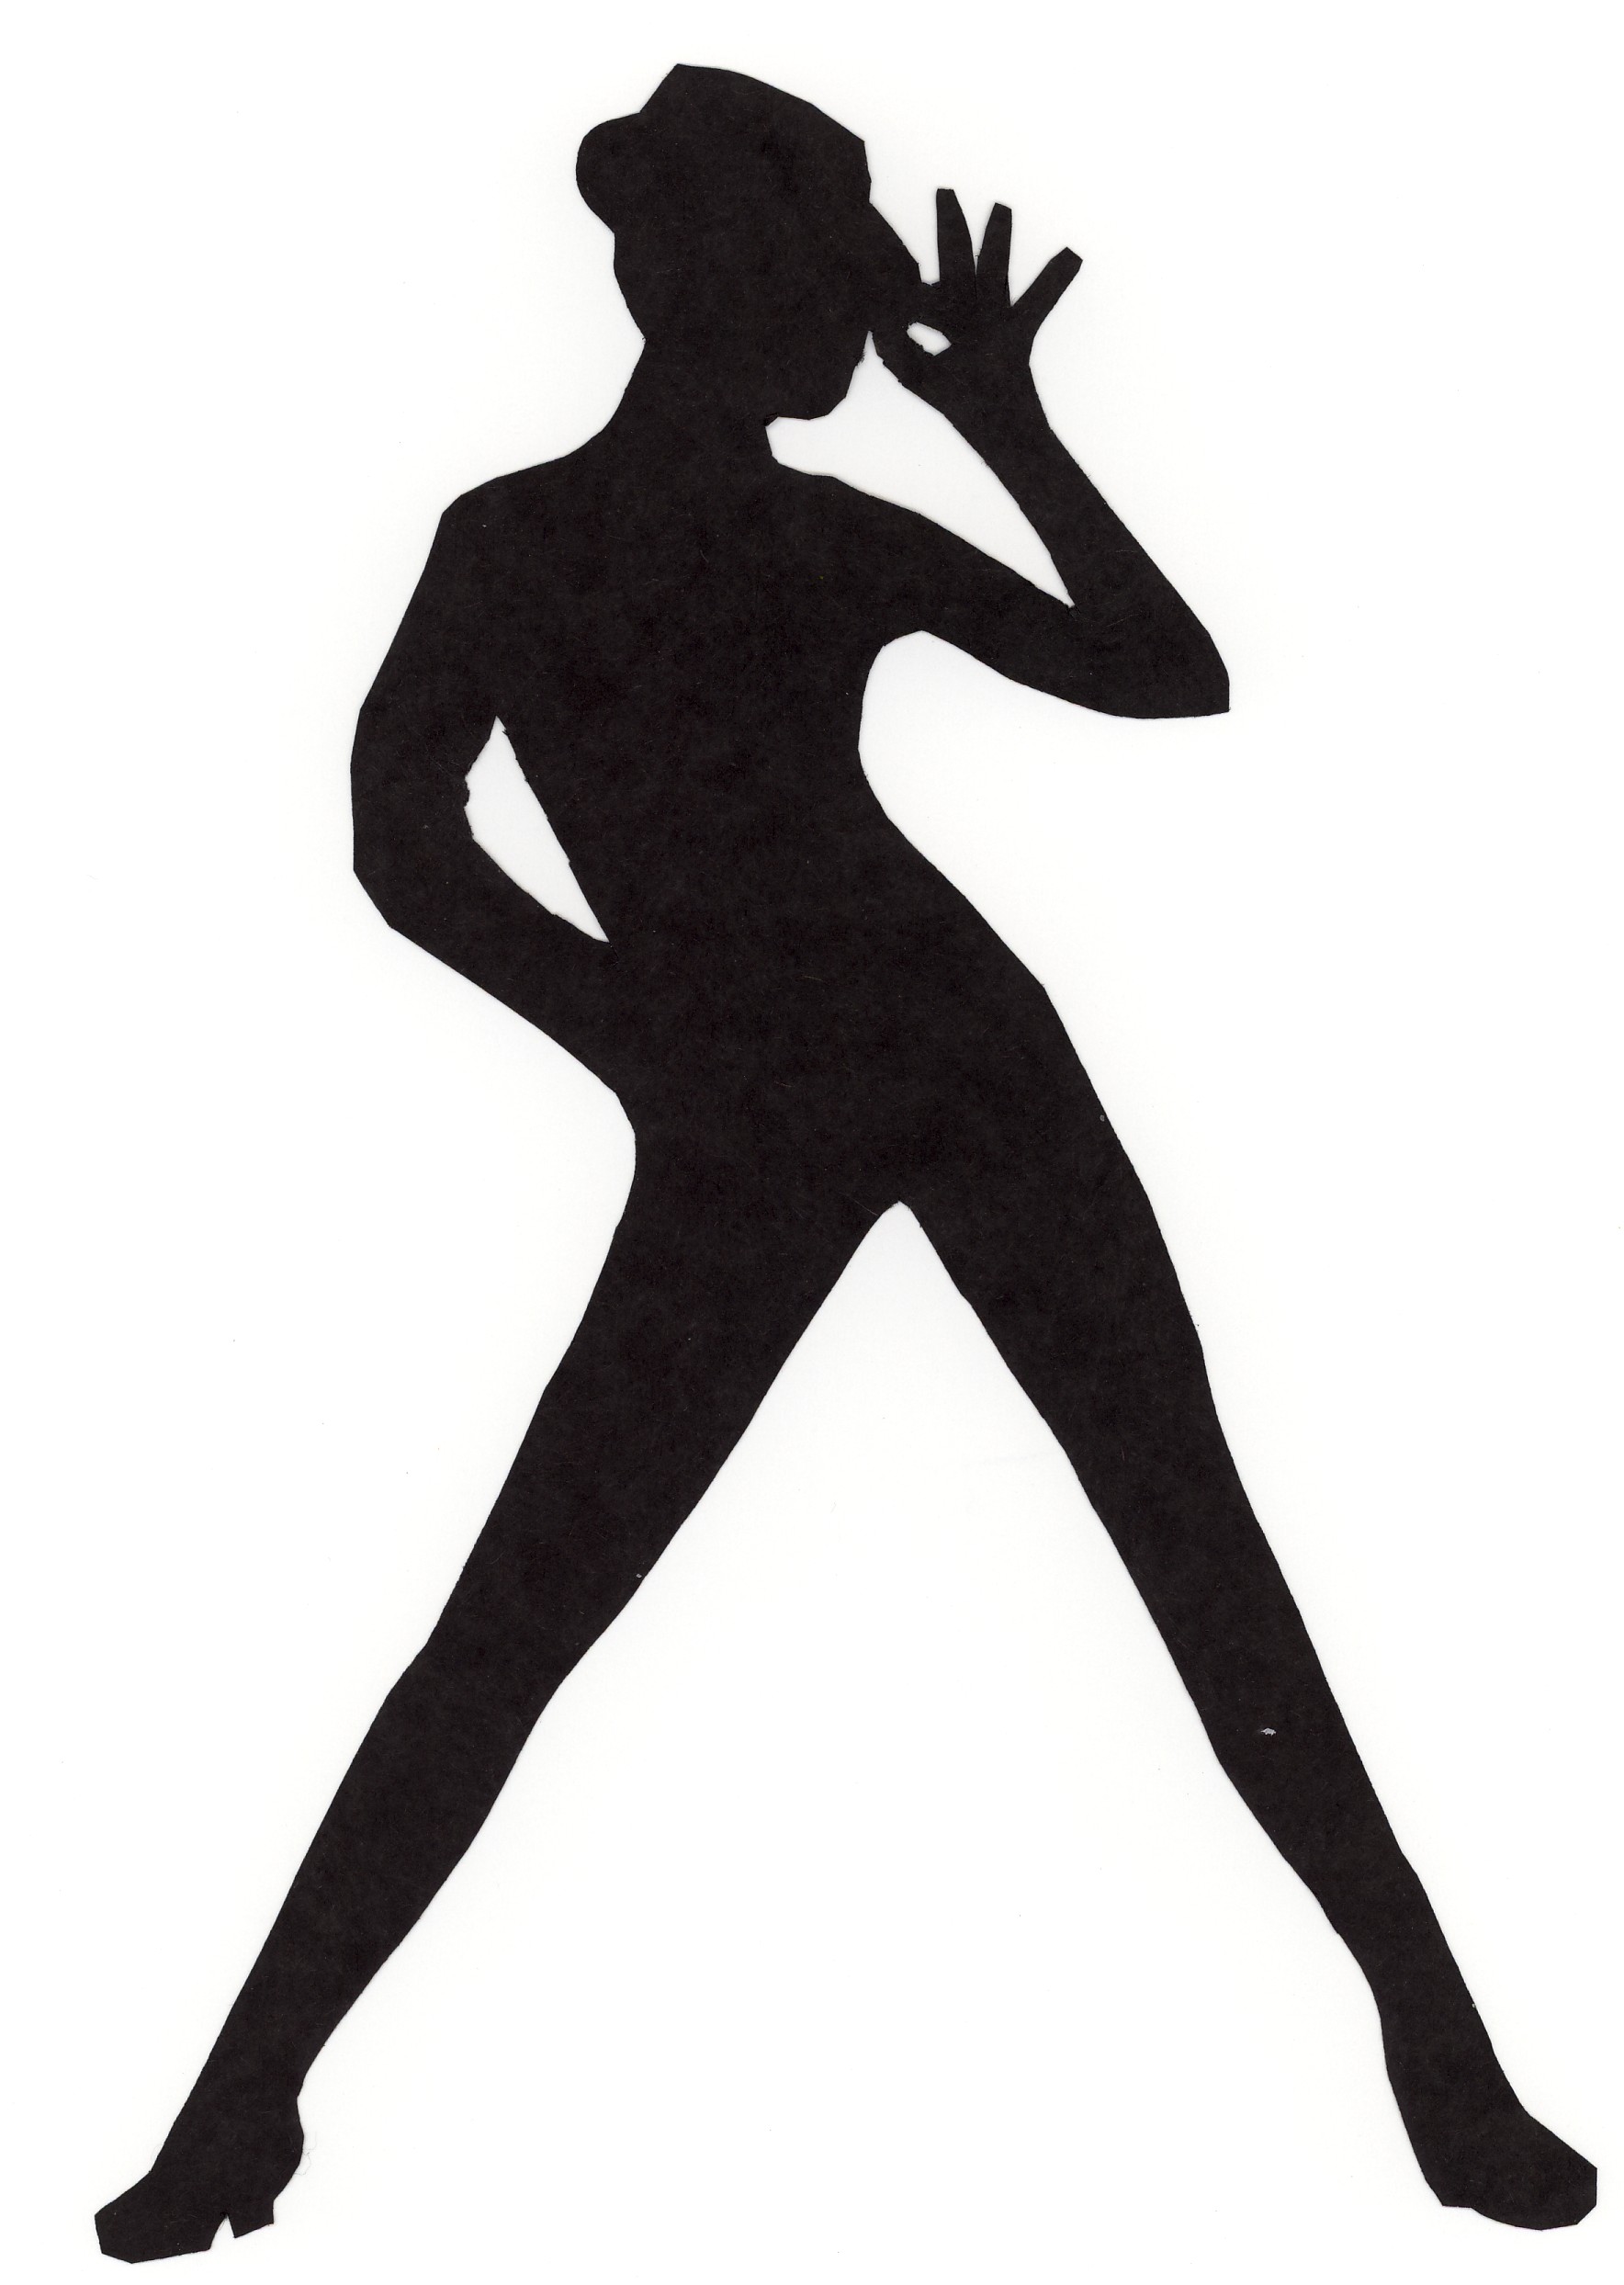 Jazz dancer clipart silhouette, Jazz Dancer PNG Silhouette - Free PNG